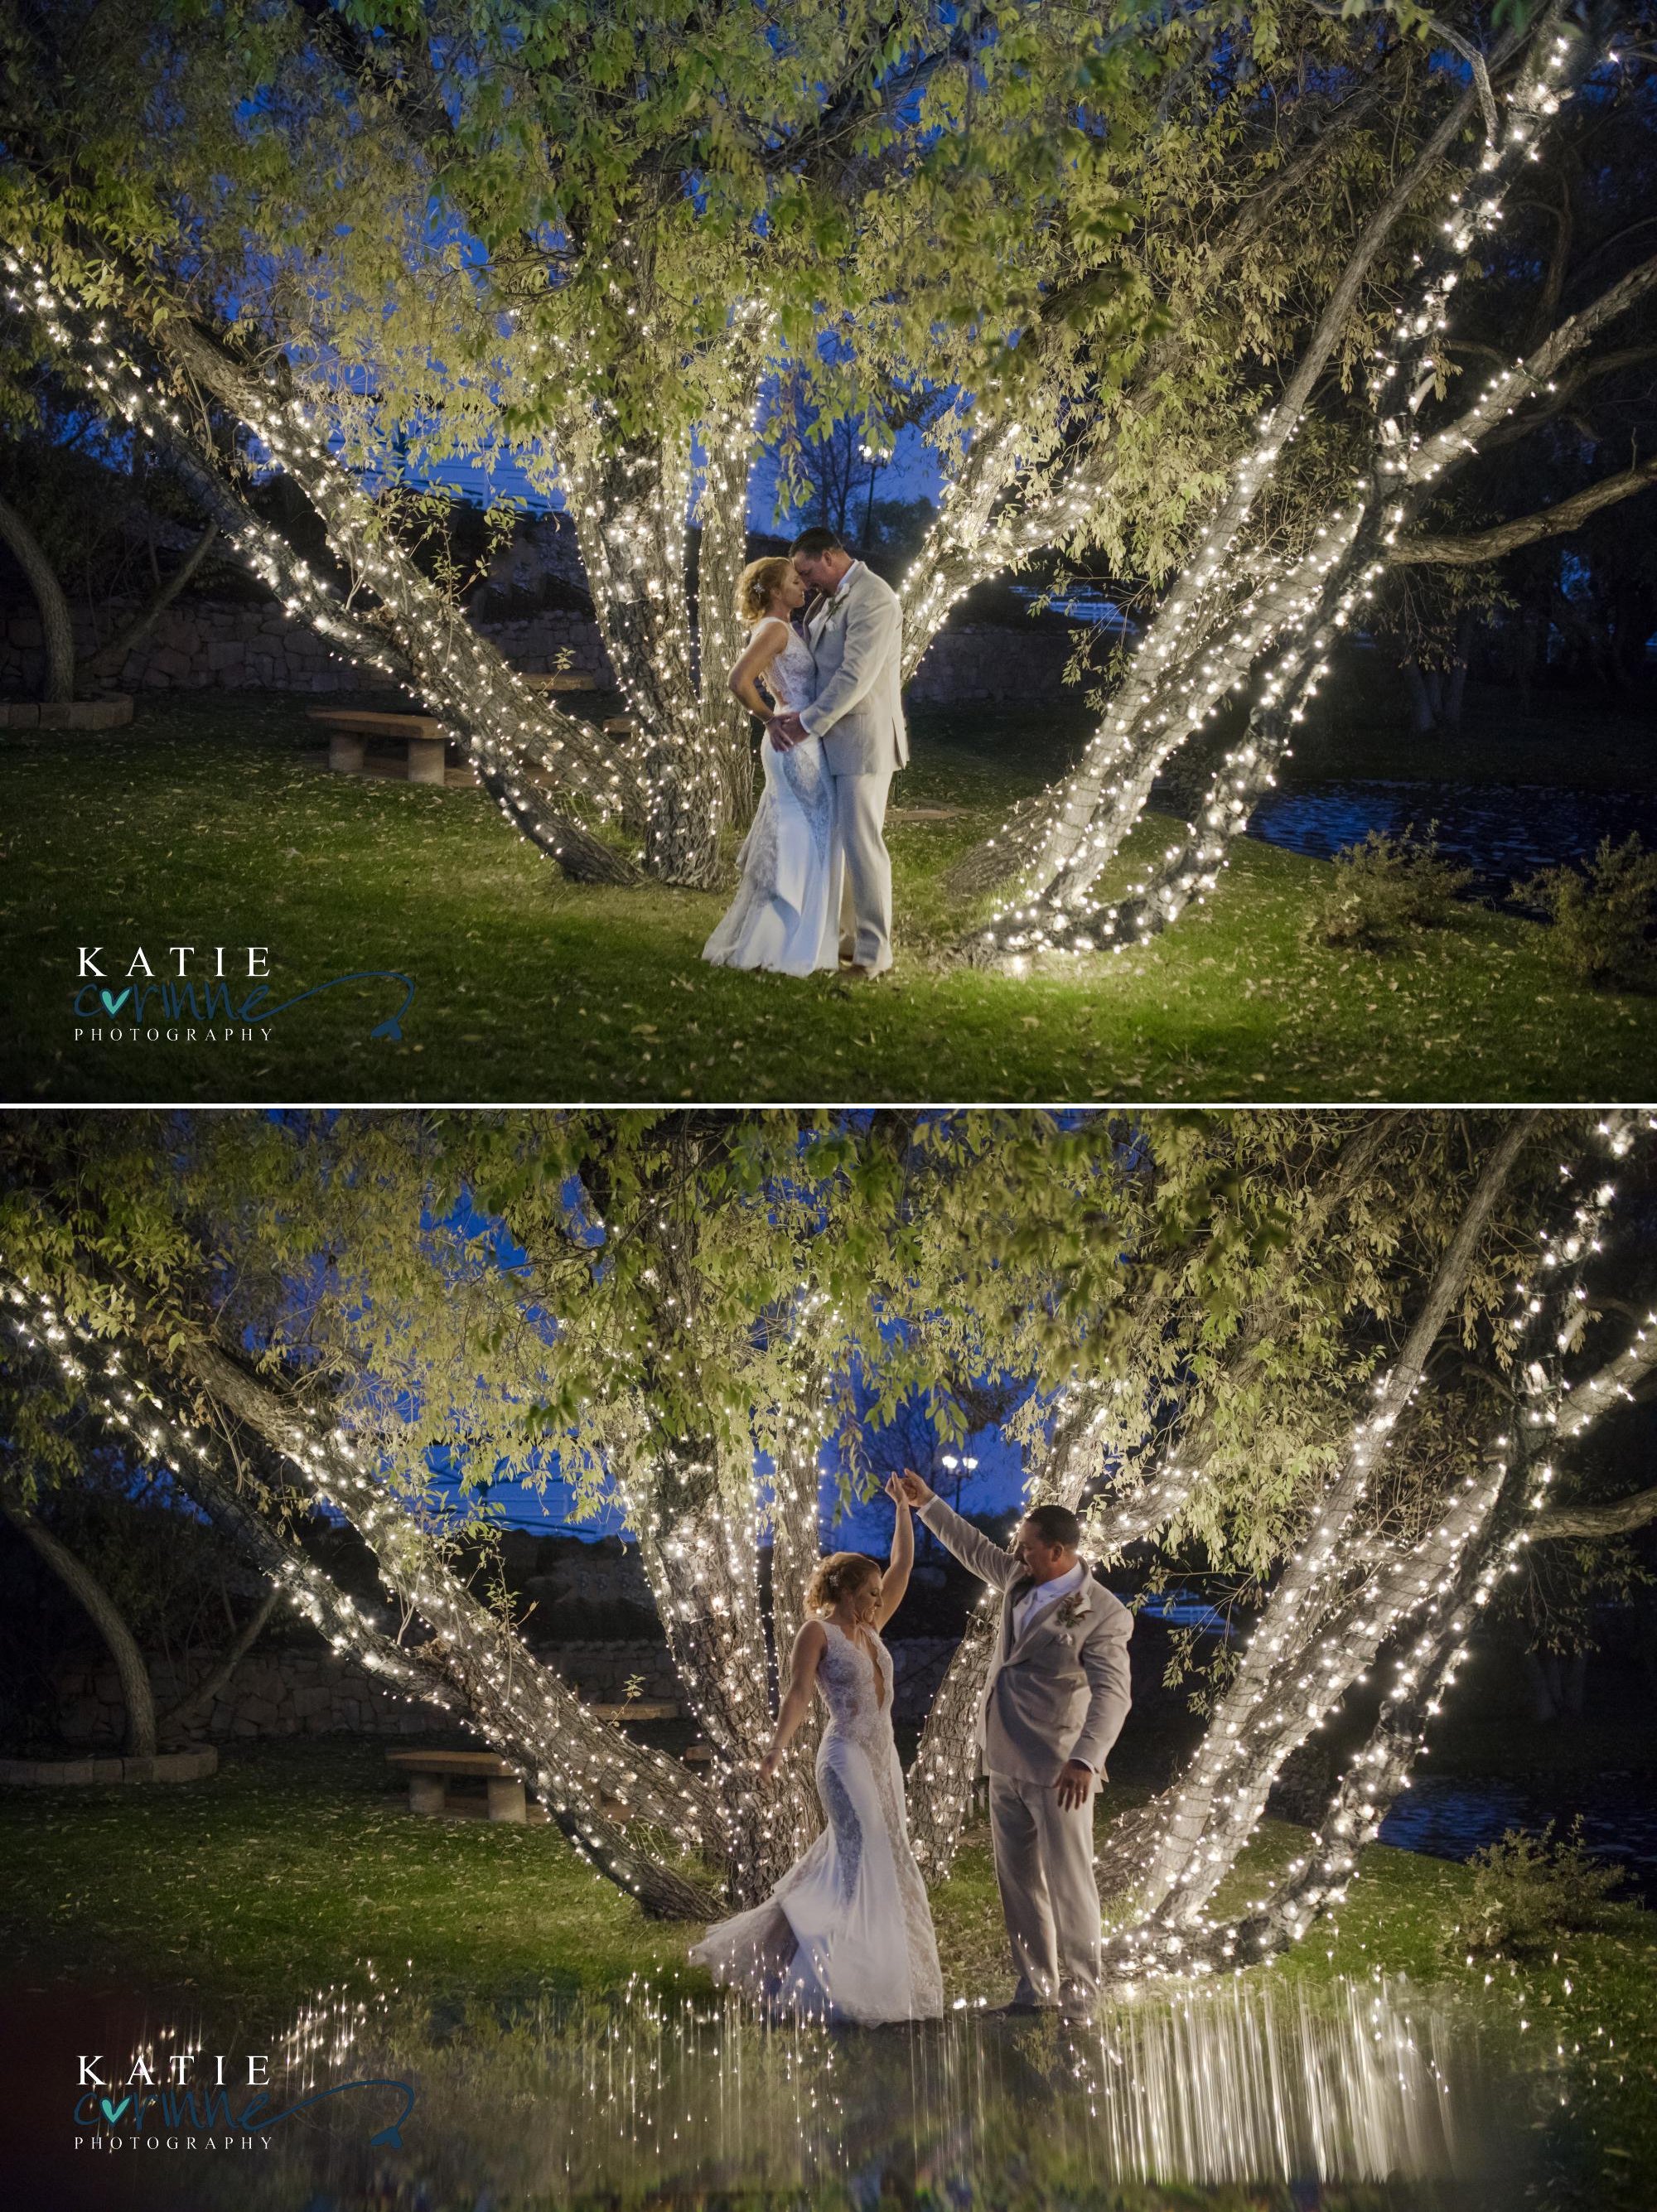 Colorado wedding couple pose for nighttime portraits in front of tree wrapped in string lights